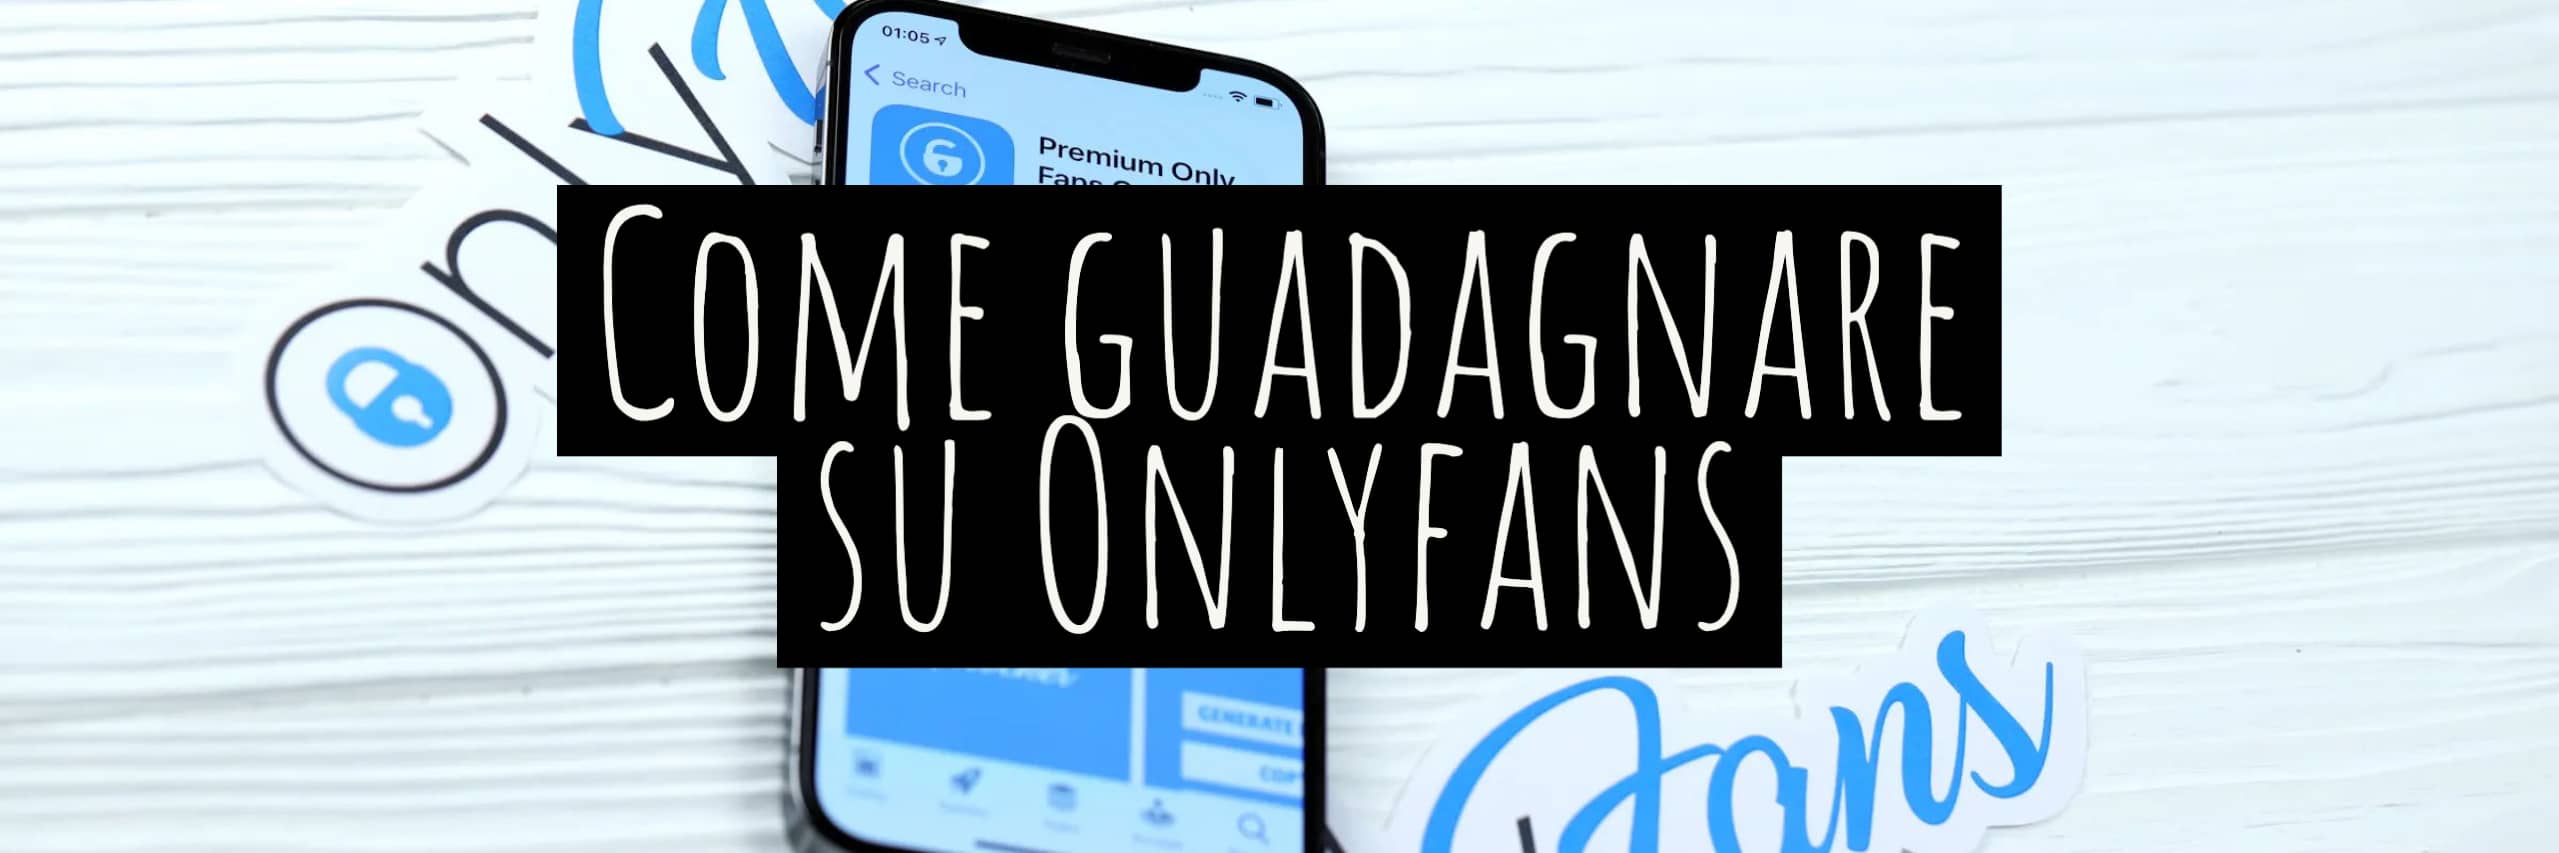 come guadagnare con onlyfans